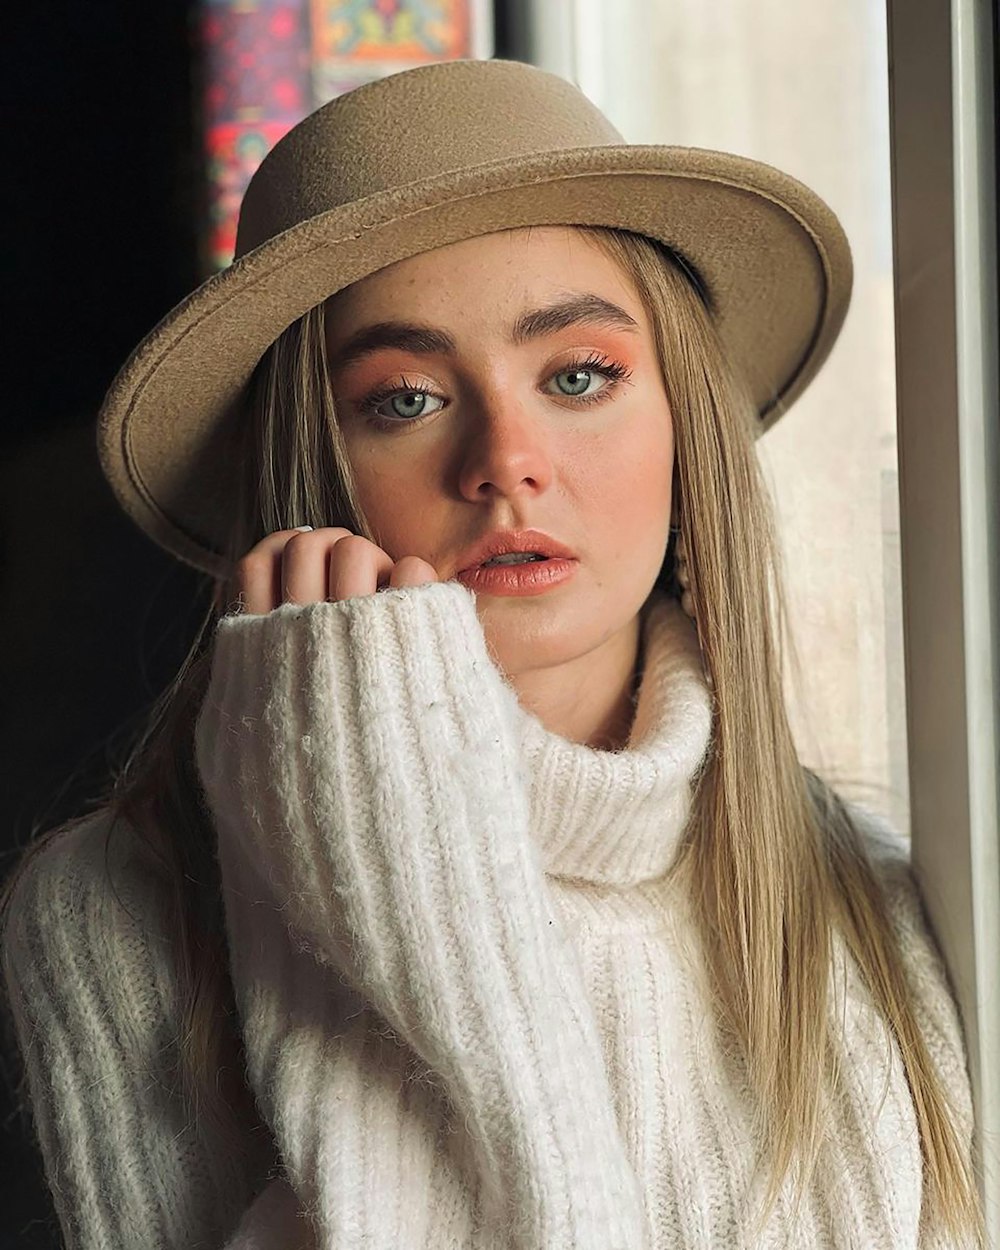 a woman wearing a hat and a white sweater